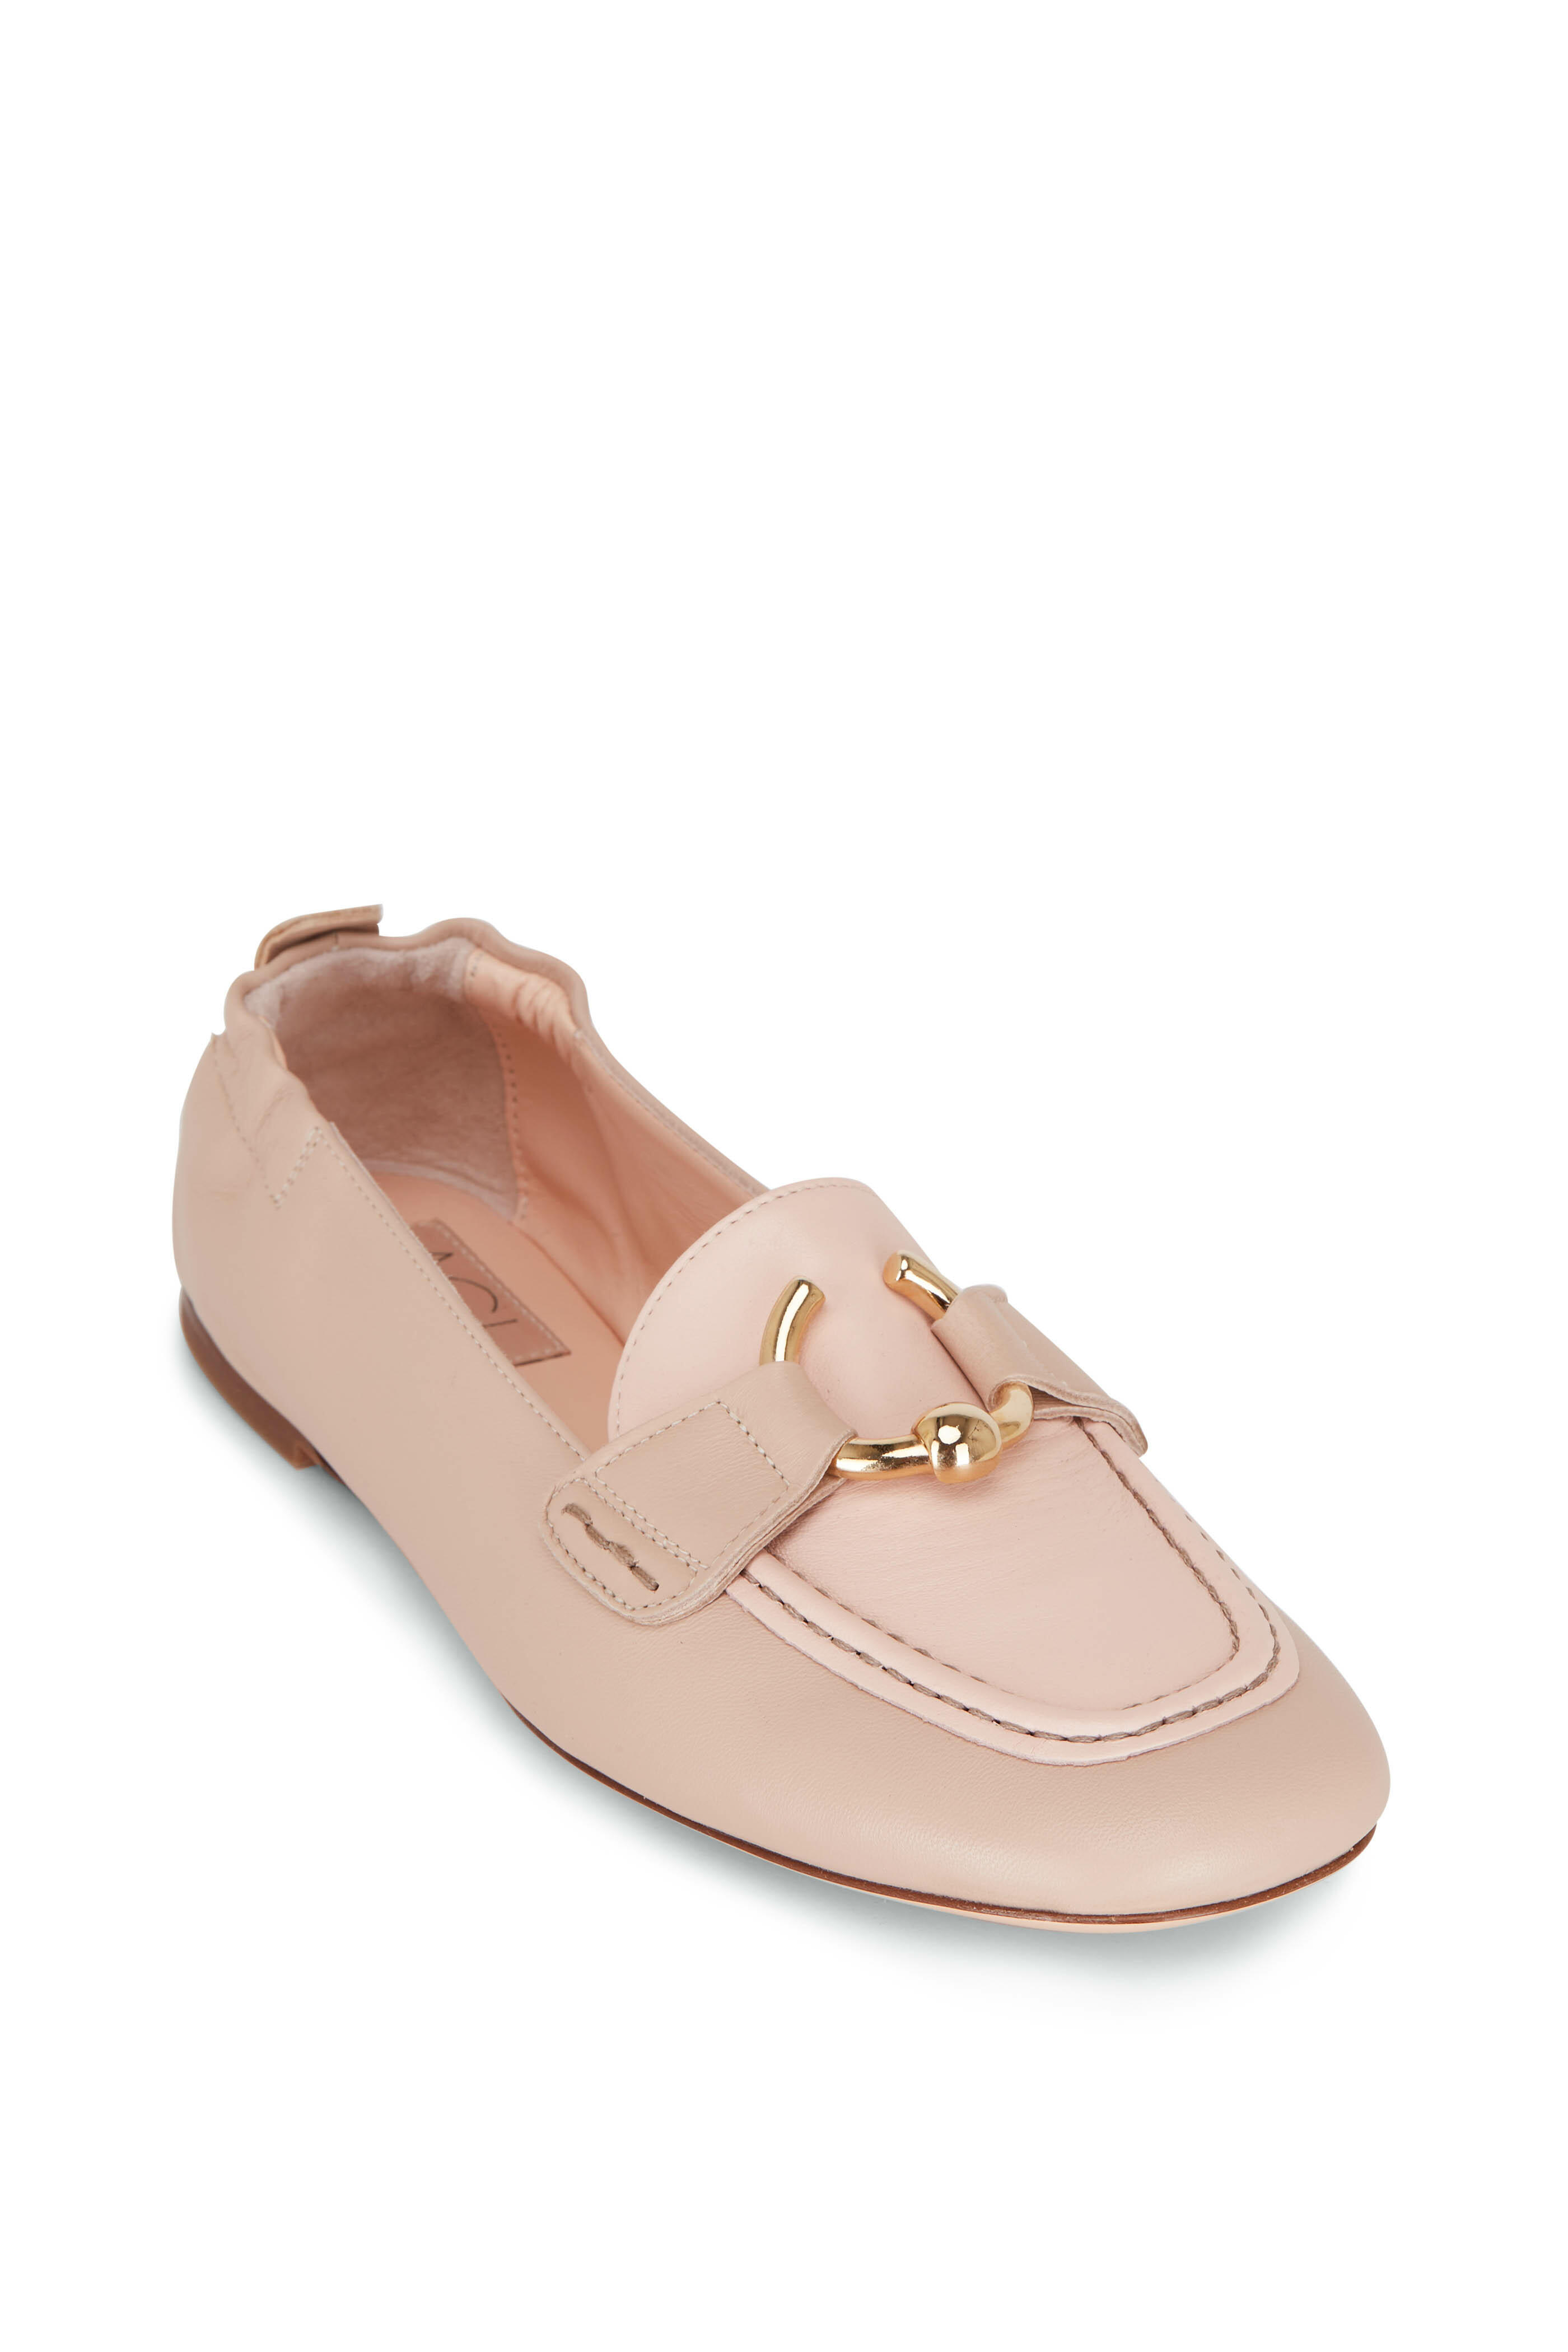 AGL - Sheryl Sand Leather Loafer | Mitchell Stores